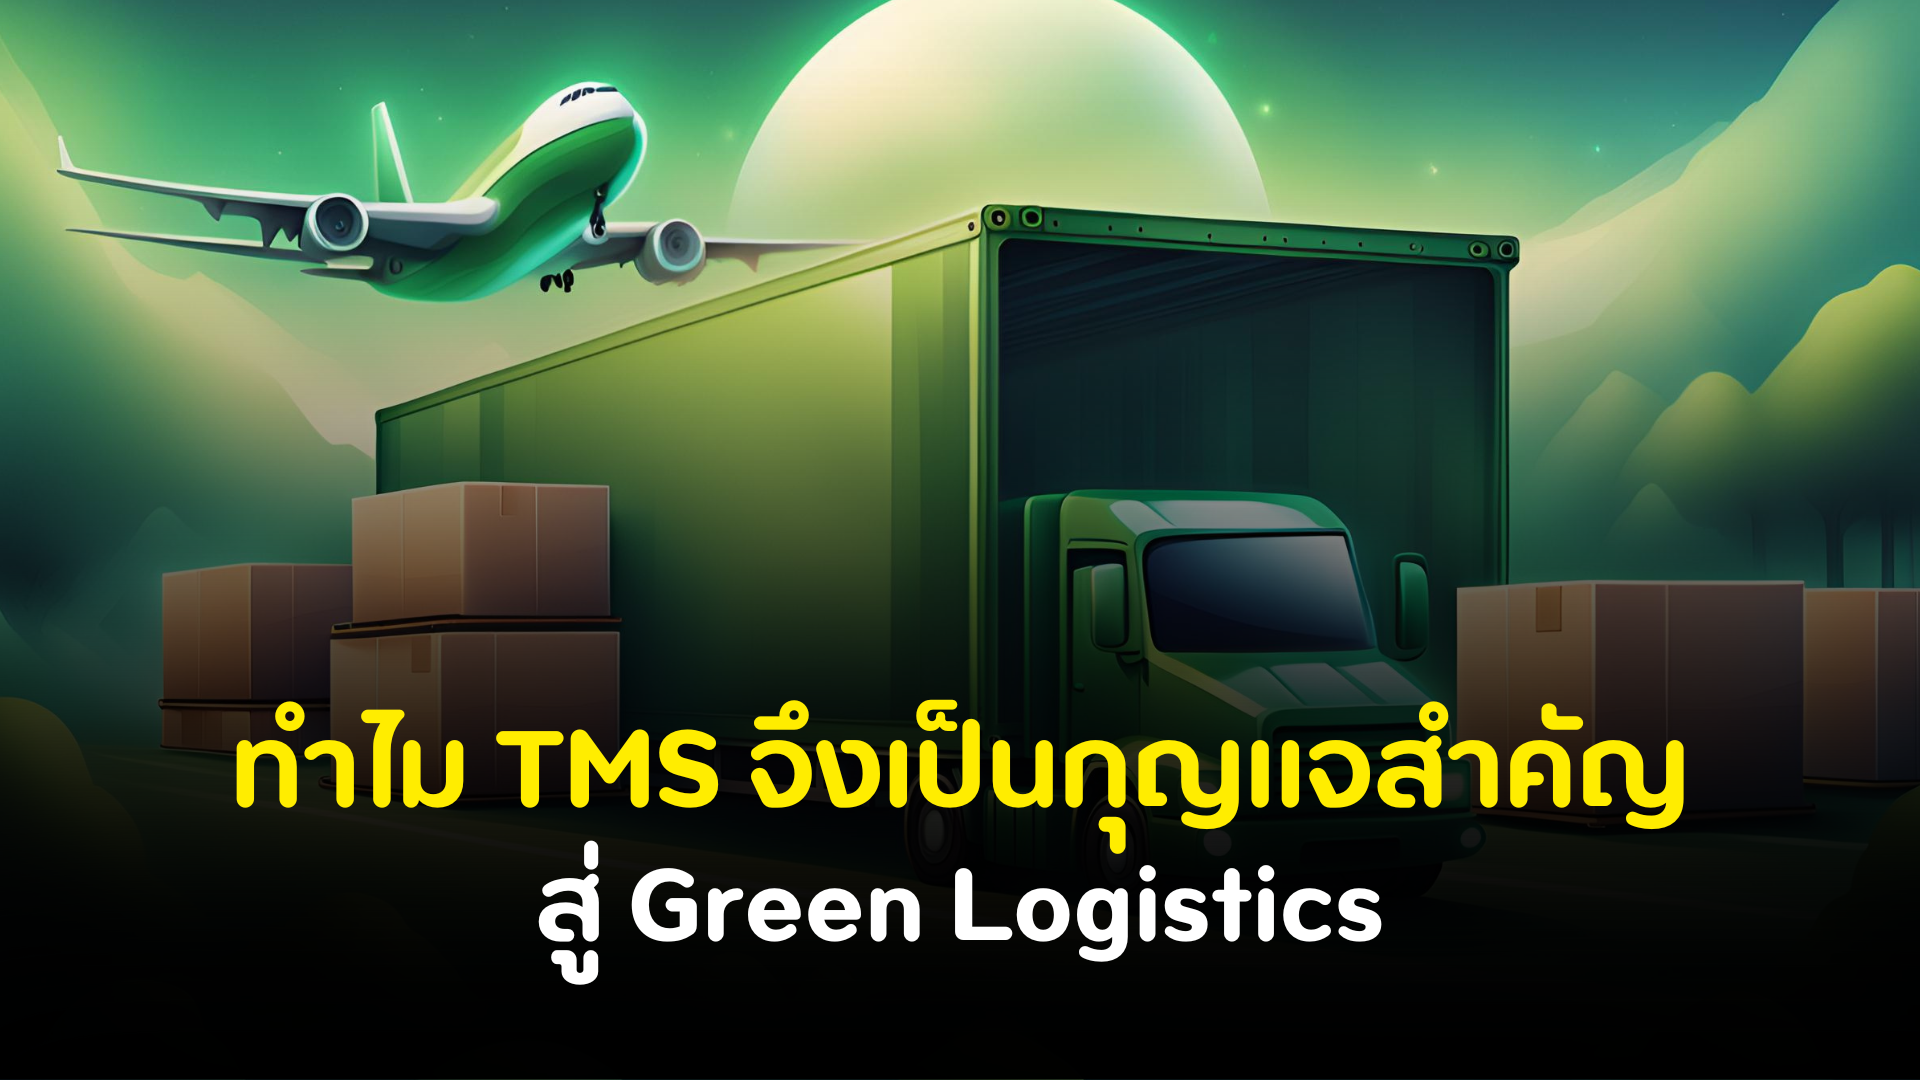 Green Logistics: How TMS Optimizes Transportation Efficiency and Reduces Carbon Emissions